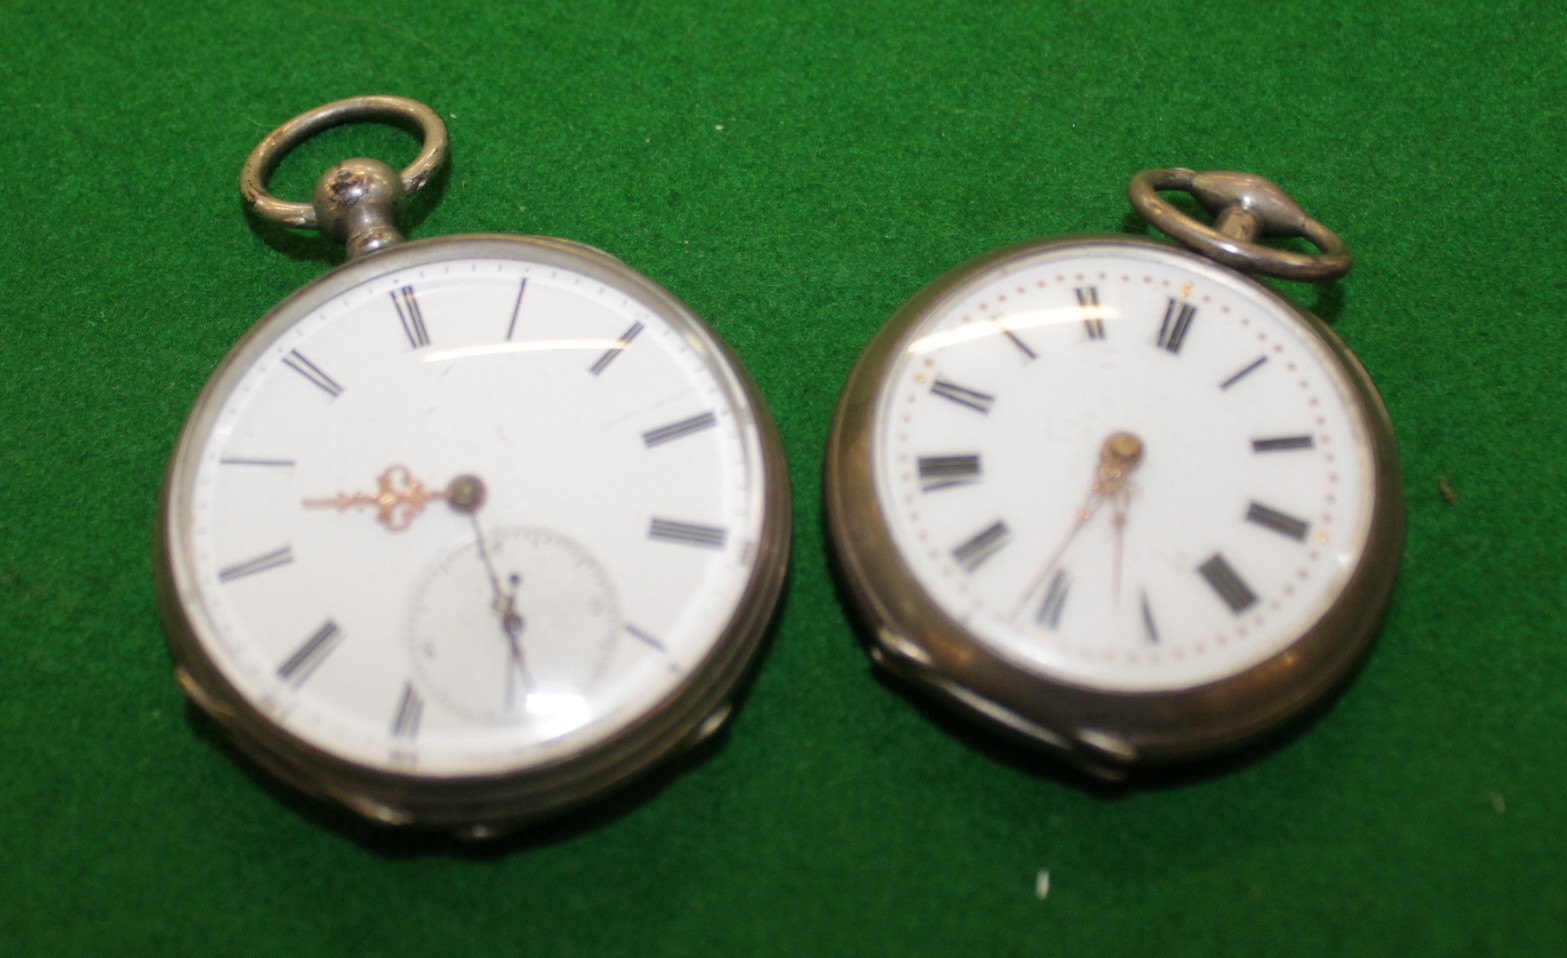 19th century French silver pocket watch with enamel Roman numeral dial, the case engraved with